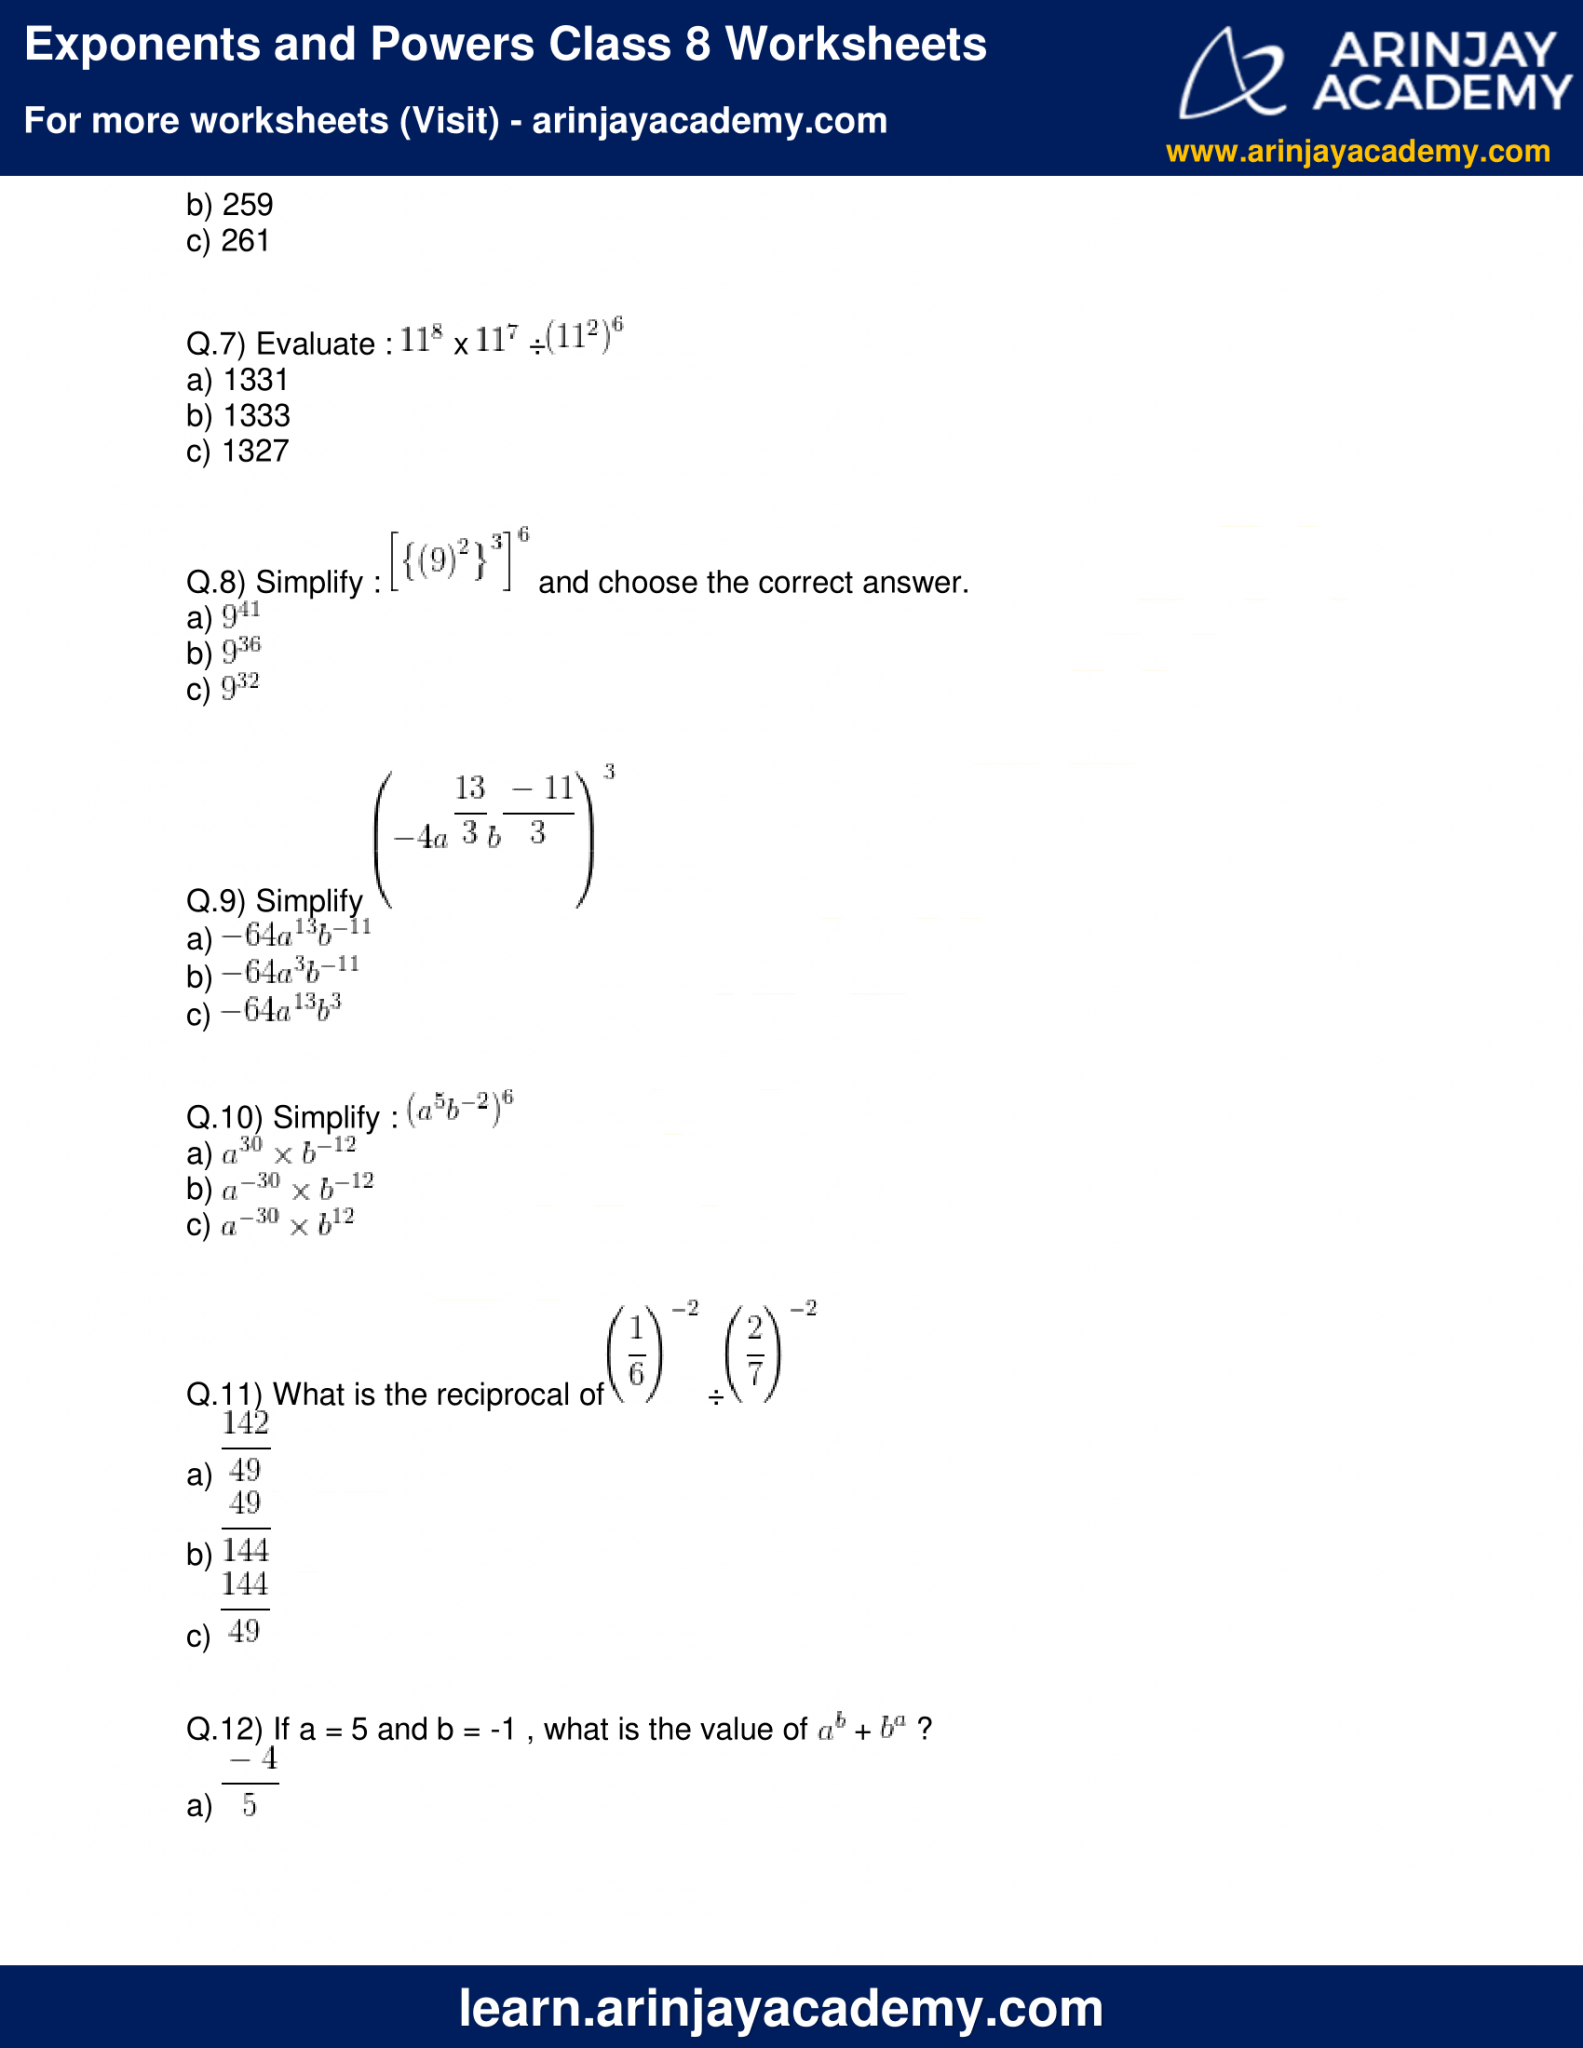 exponents-and-powers-class-8-worksheets-free-and-printable-maths